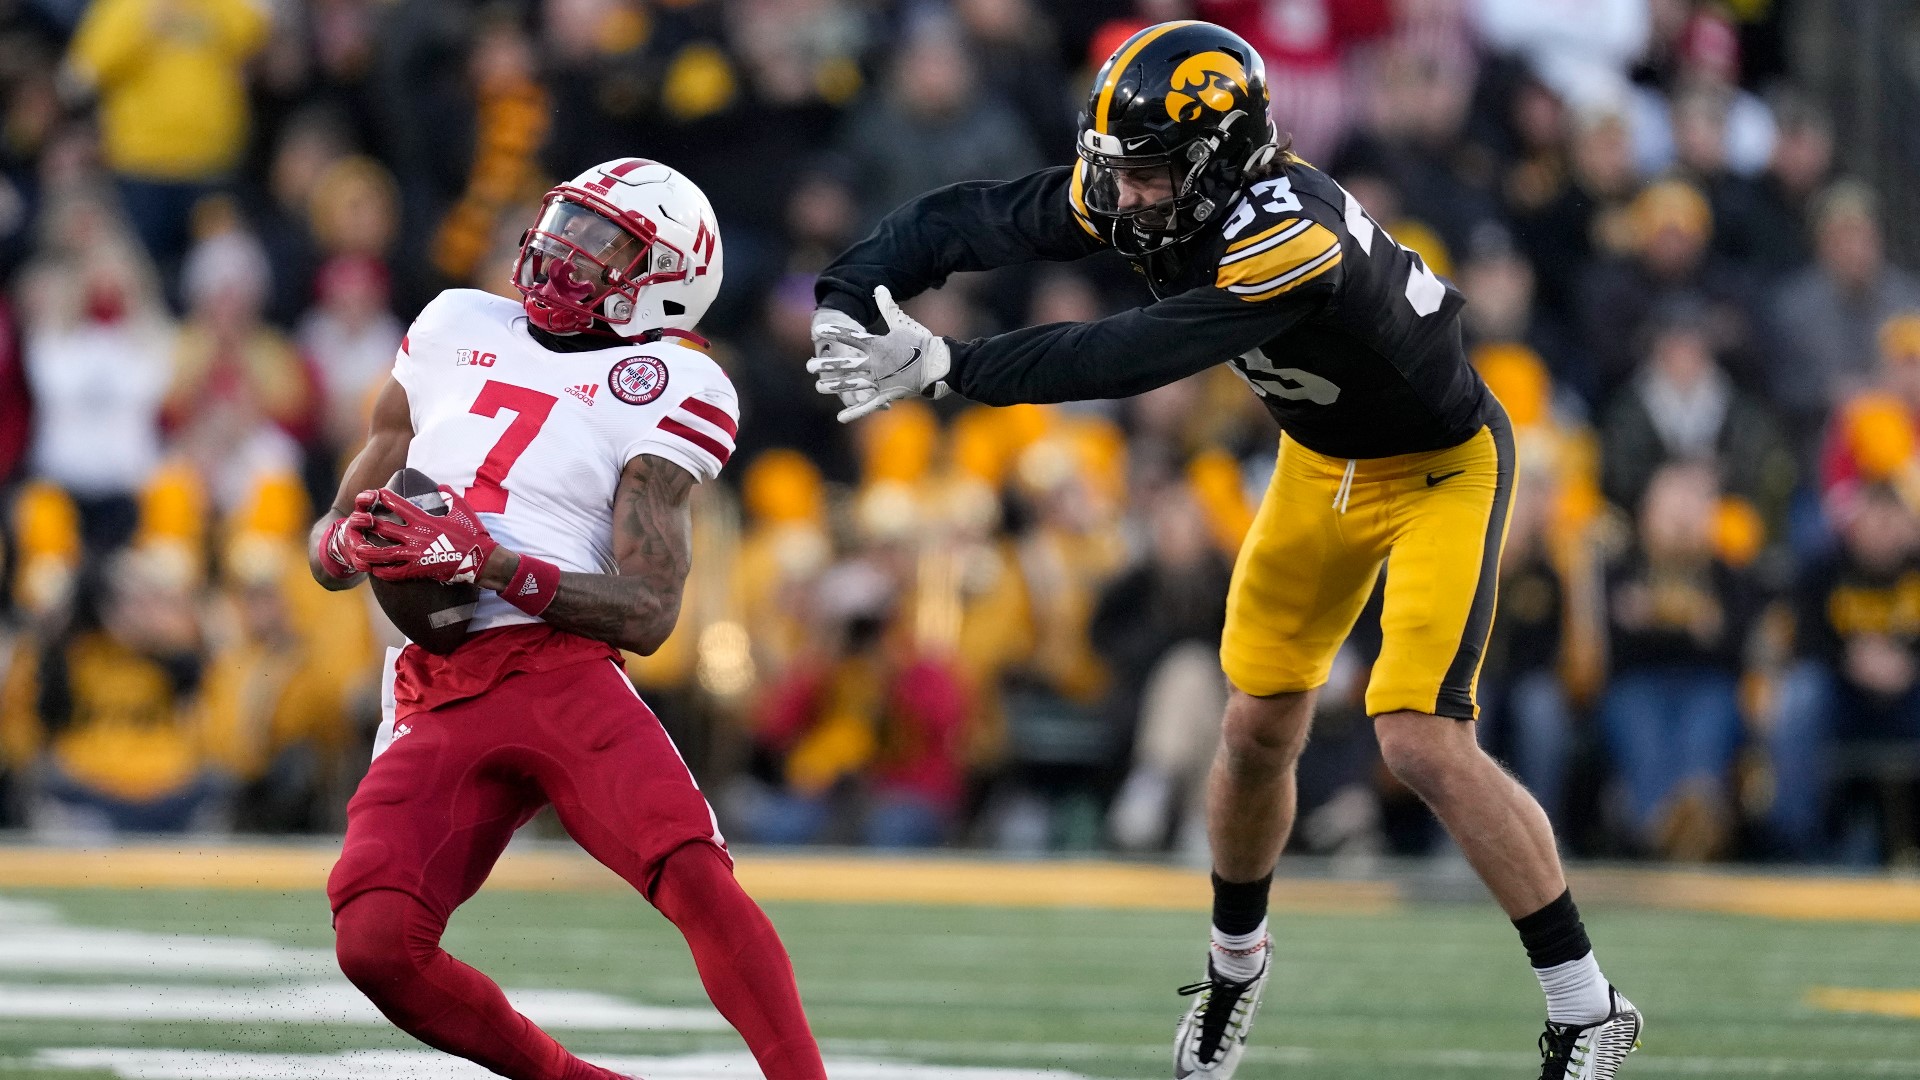 Nebraska ruined Iowa’s chance to clinch the Big Ten West Division title outright with a 24-17 win on Friday.